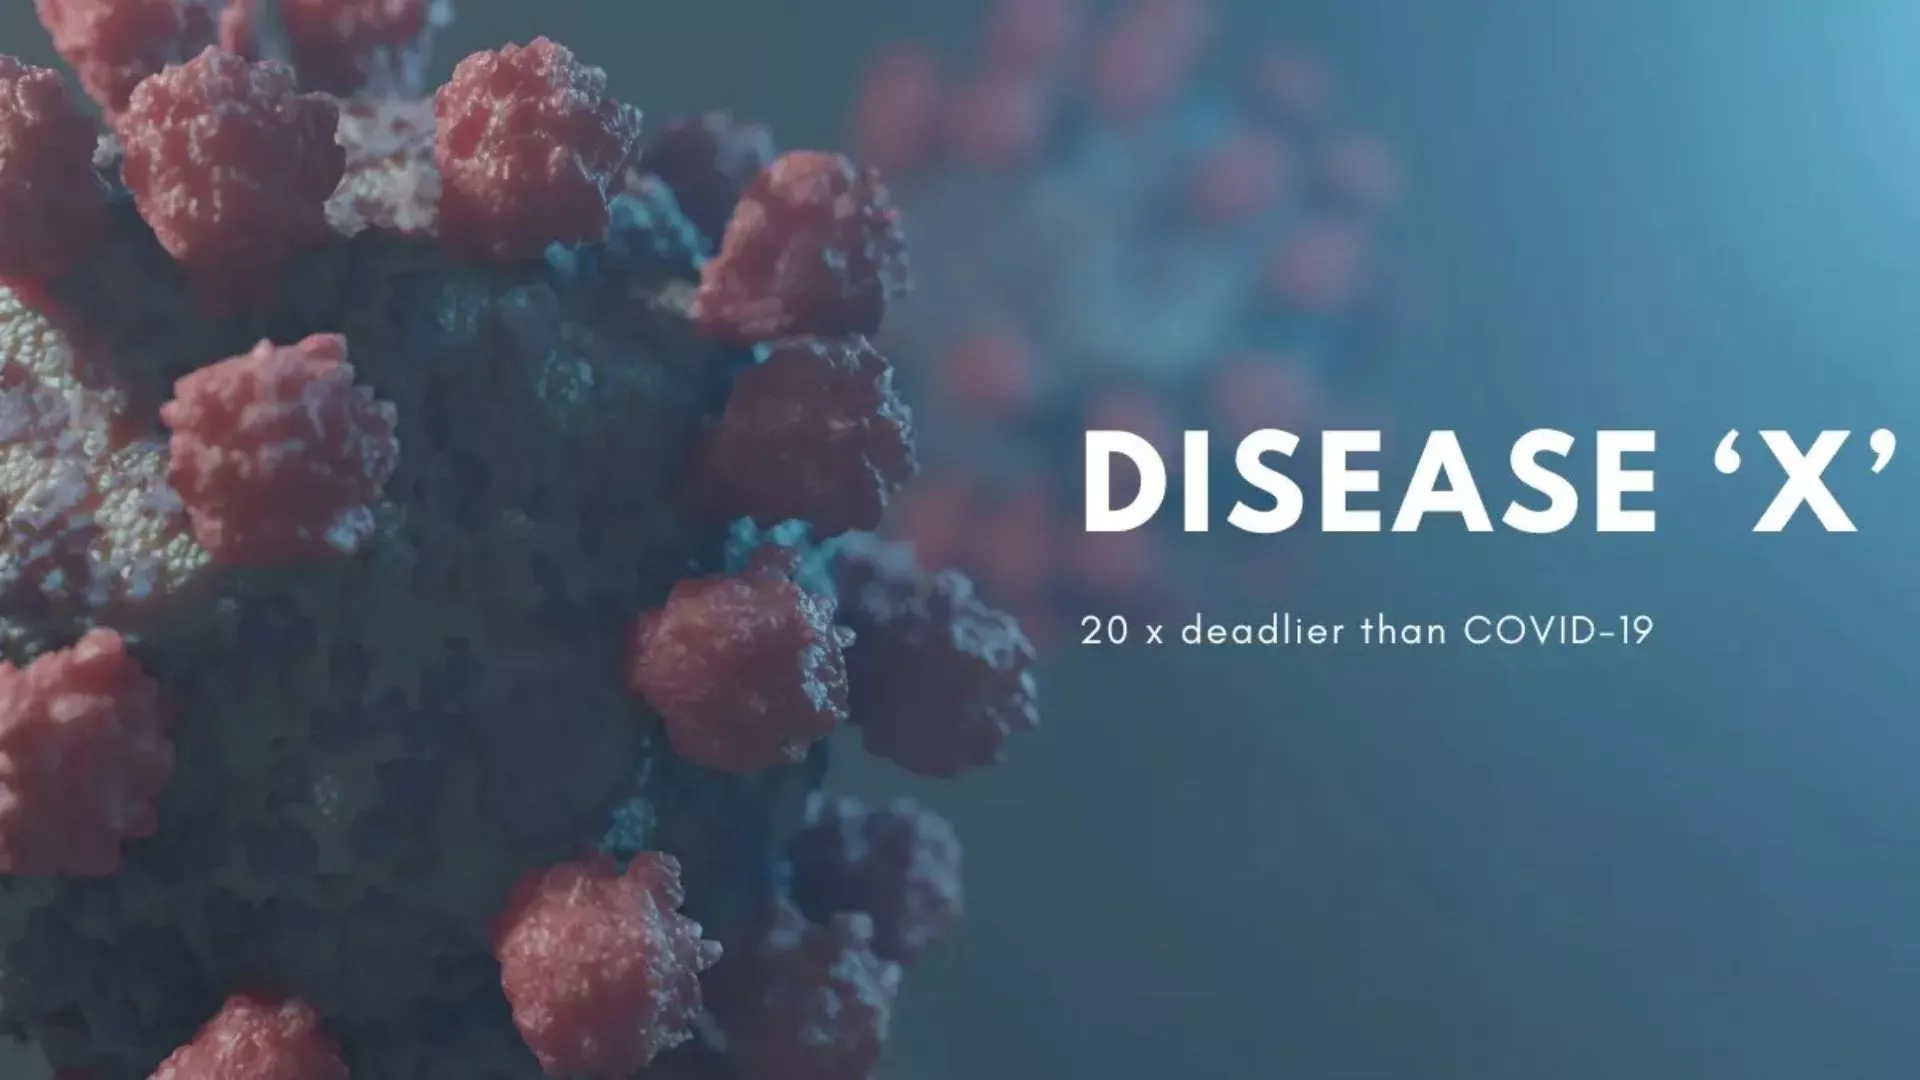 Disease X 7 important points about this Deadly Virus, It is 20 times deadlier than COVID